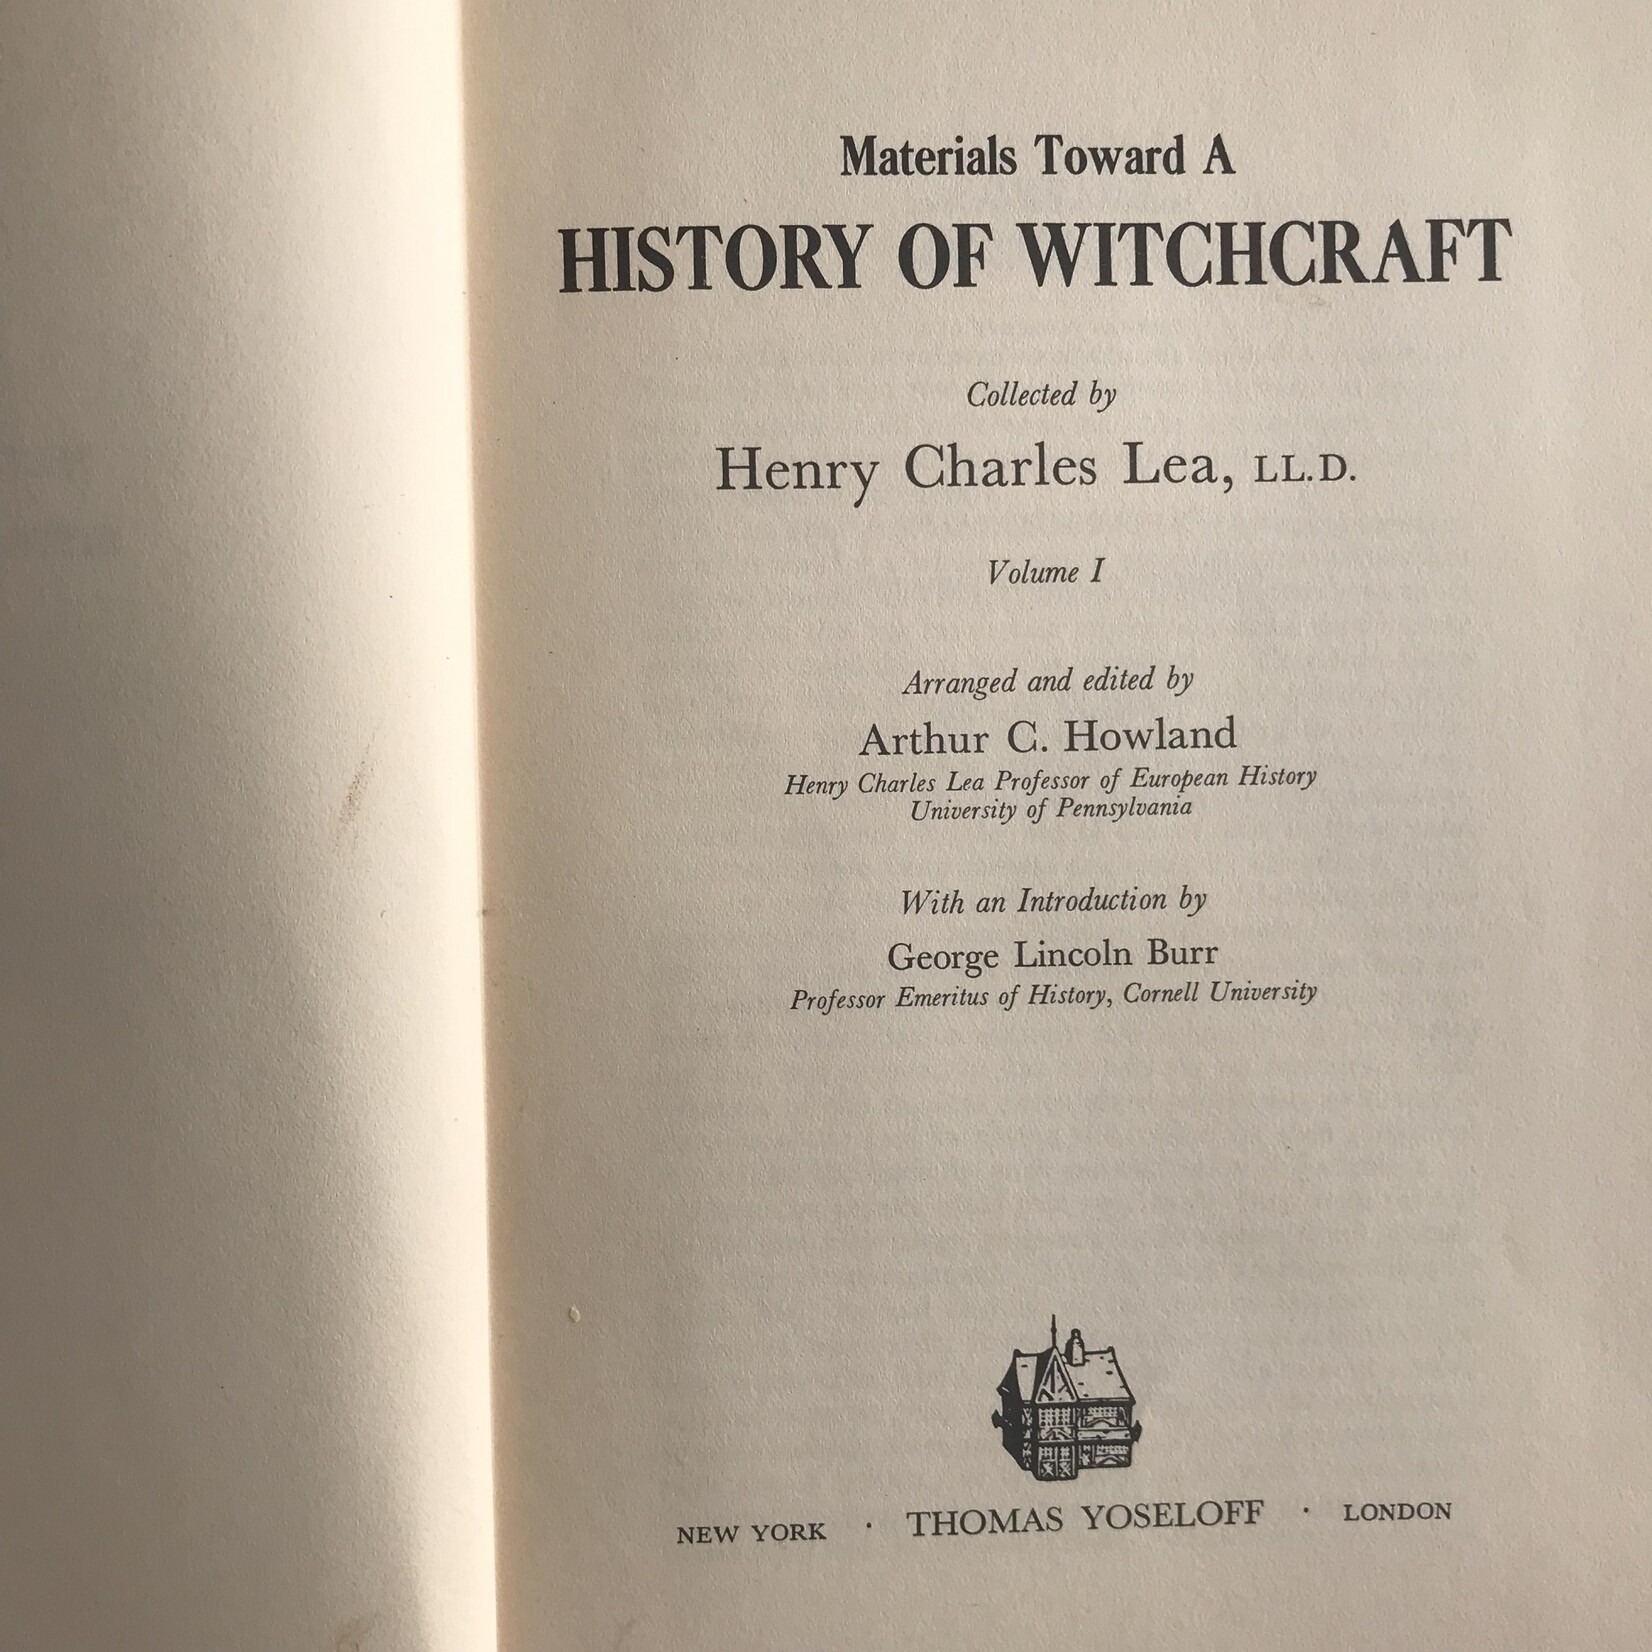 Henry Charles Lea - Materials Toward A History Of Witchcraft Vol. 1 - Hardback (USED)